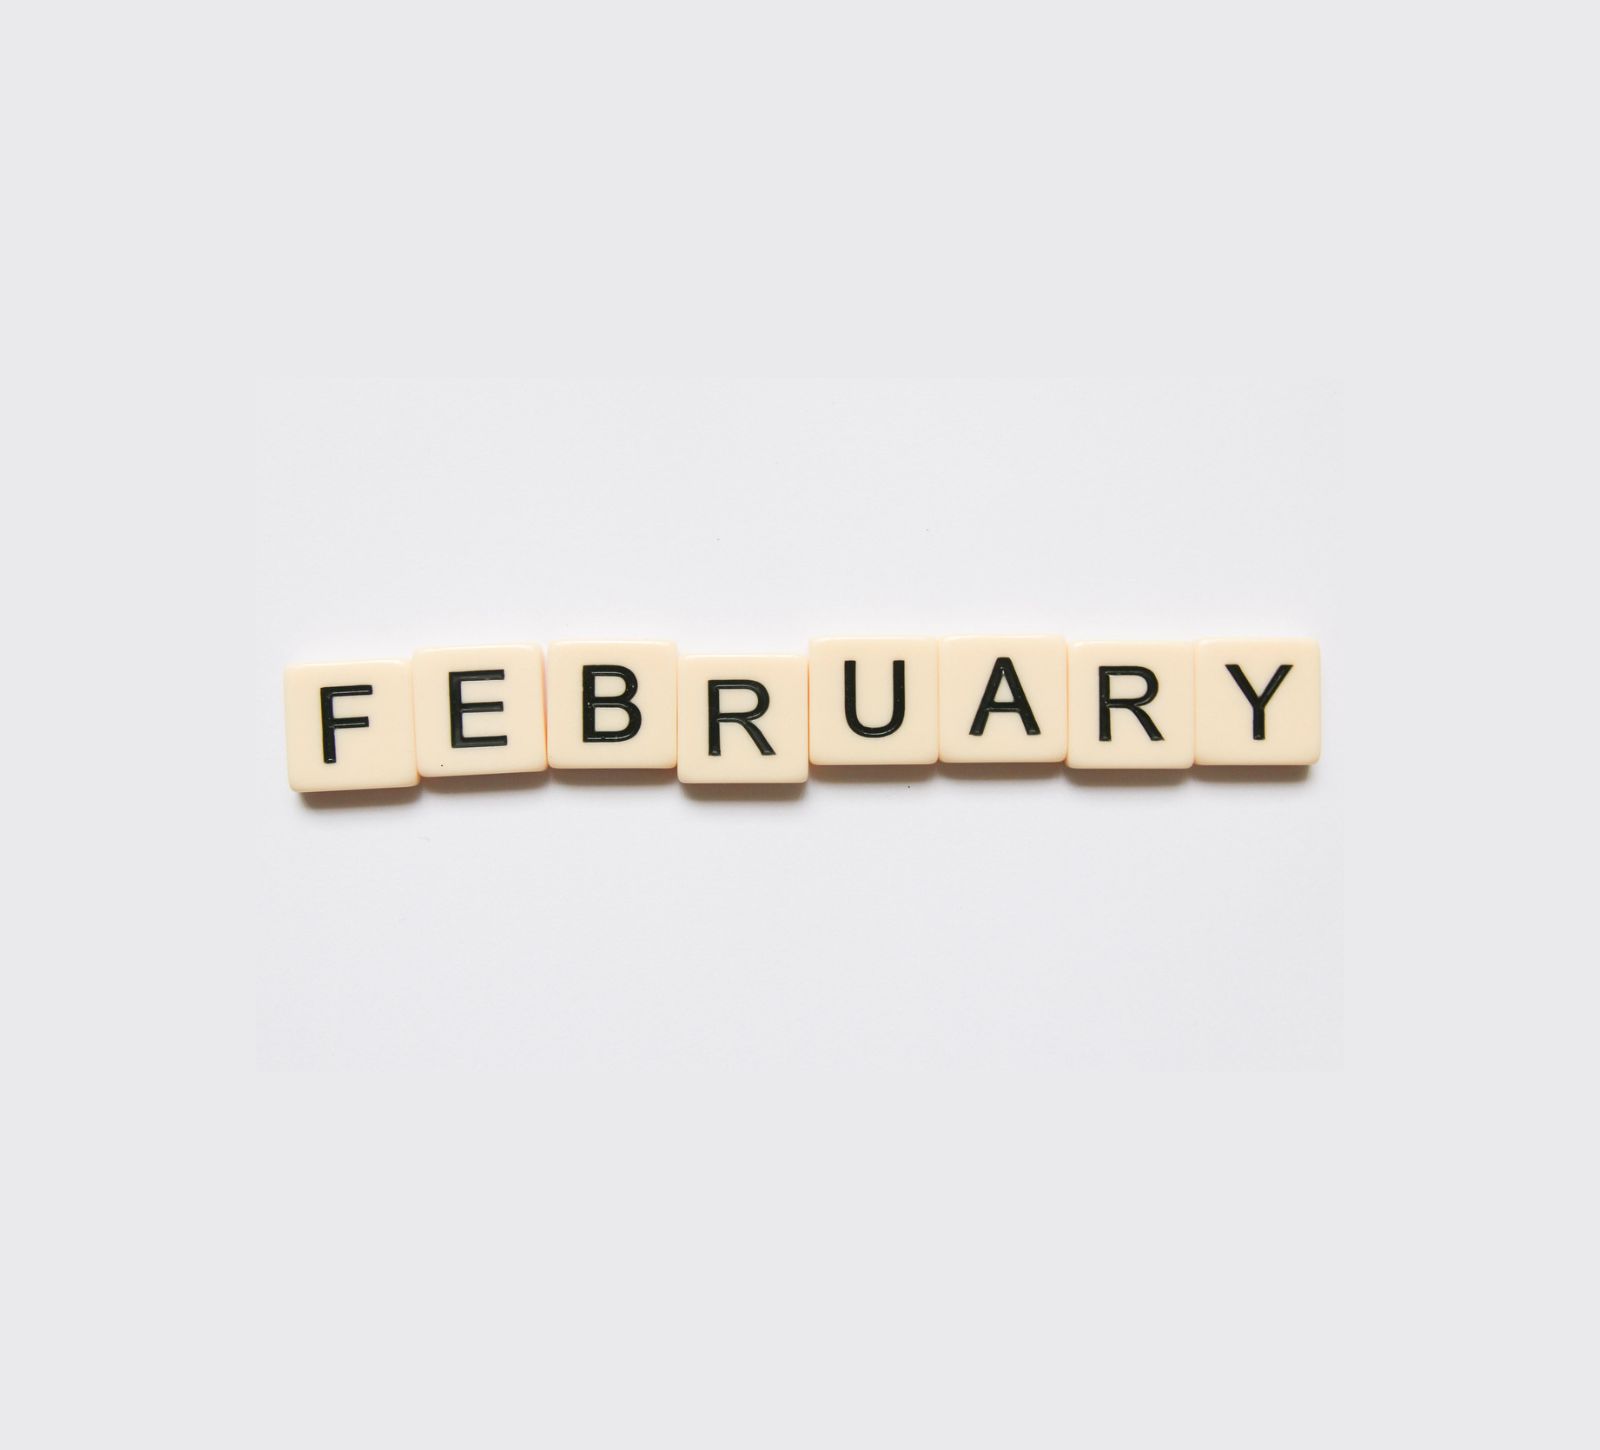 Kitchen Table CEOS Blog 15 Post Ideas for February - image of scrabble tiles spelling February